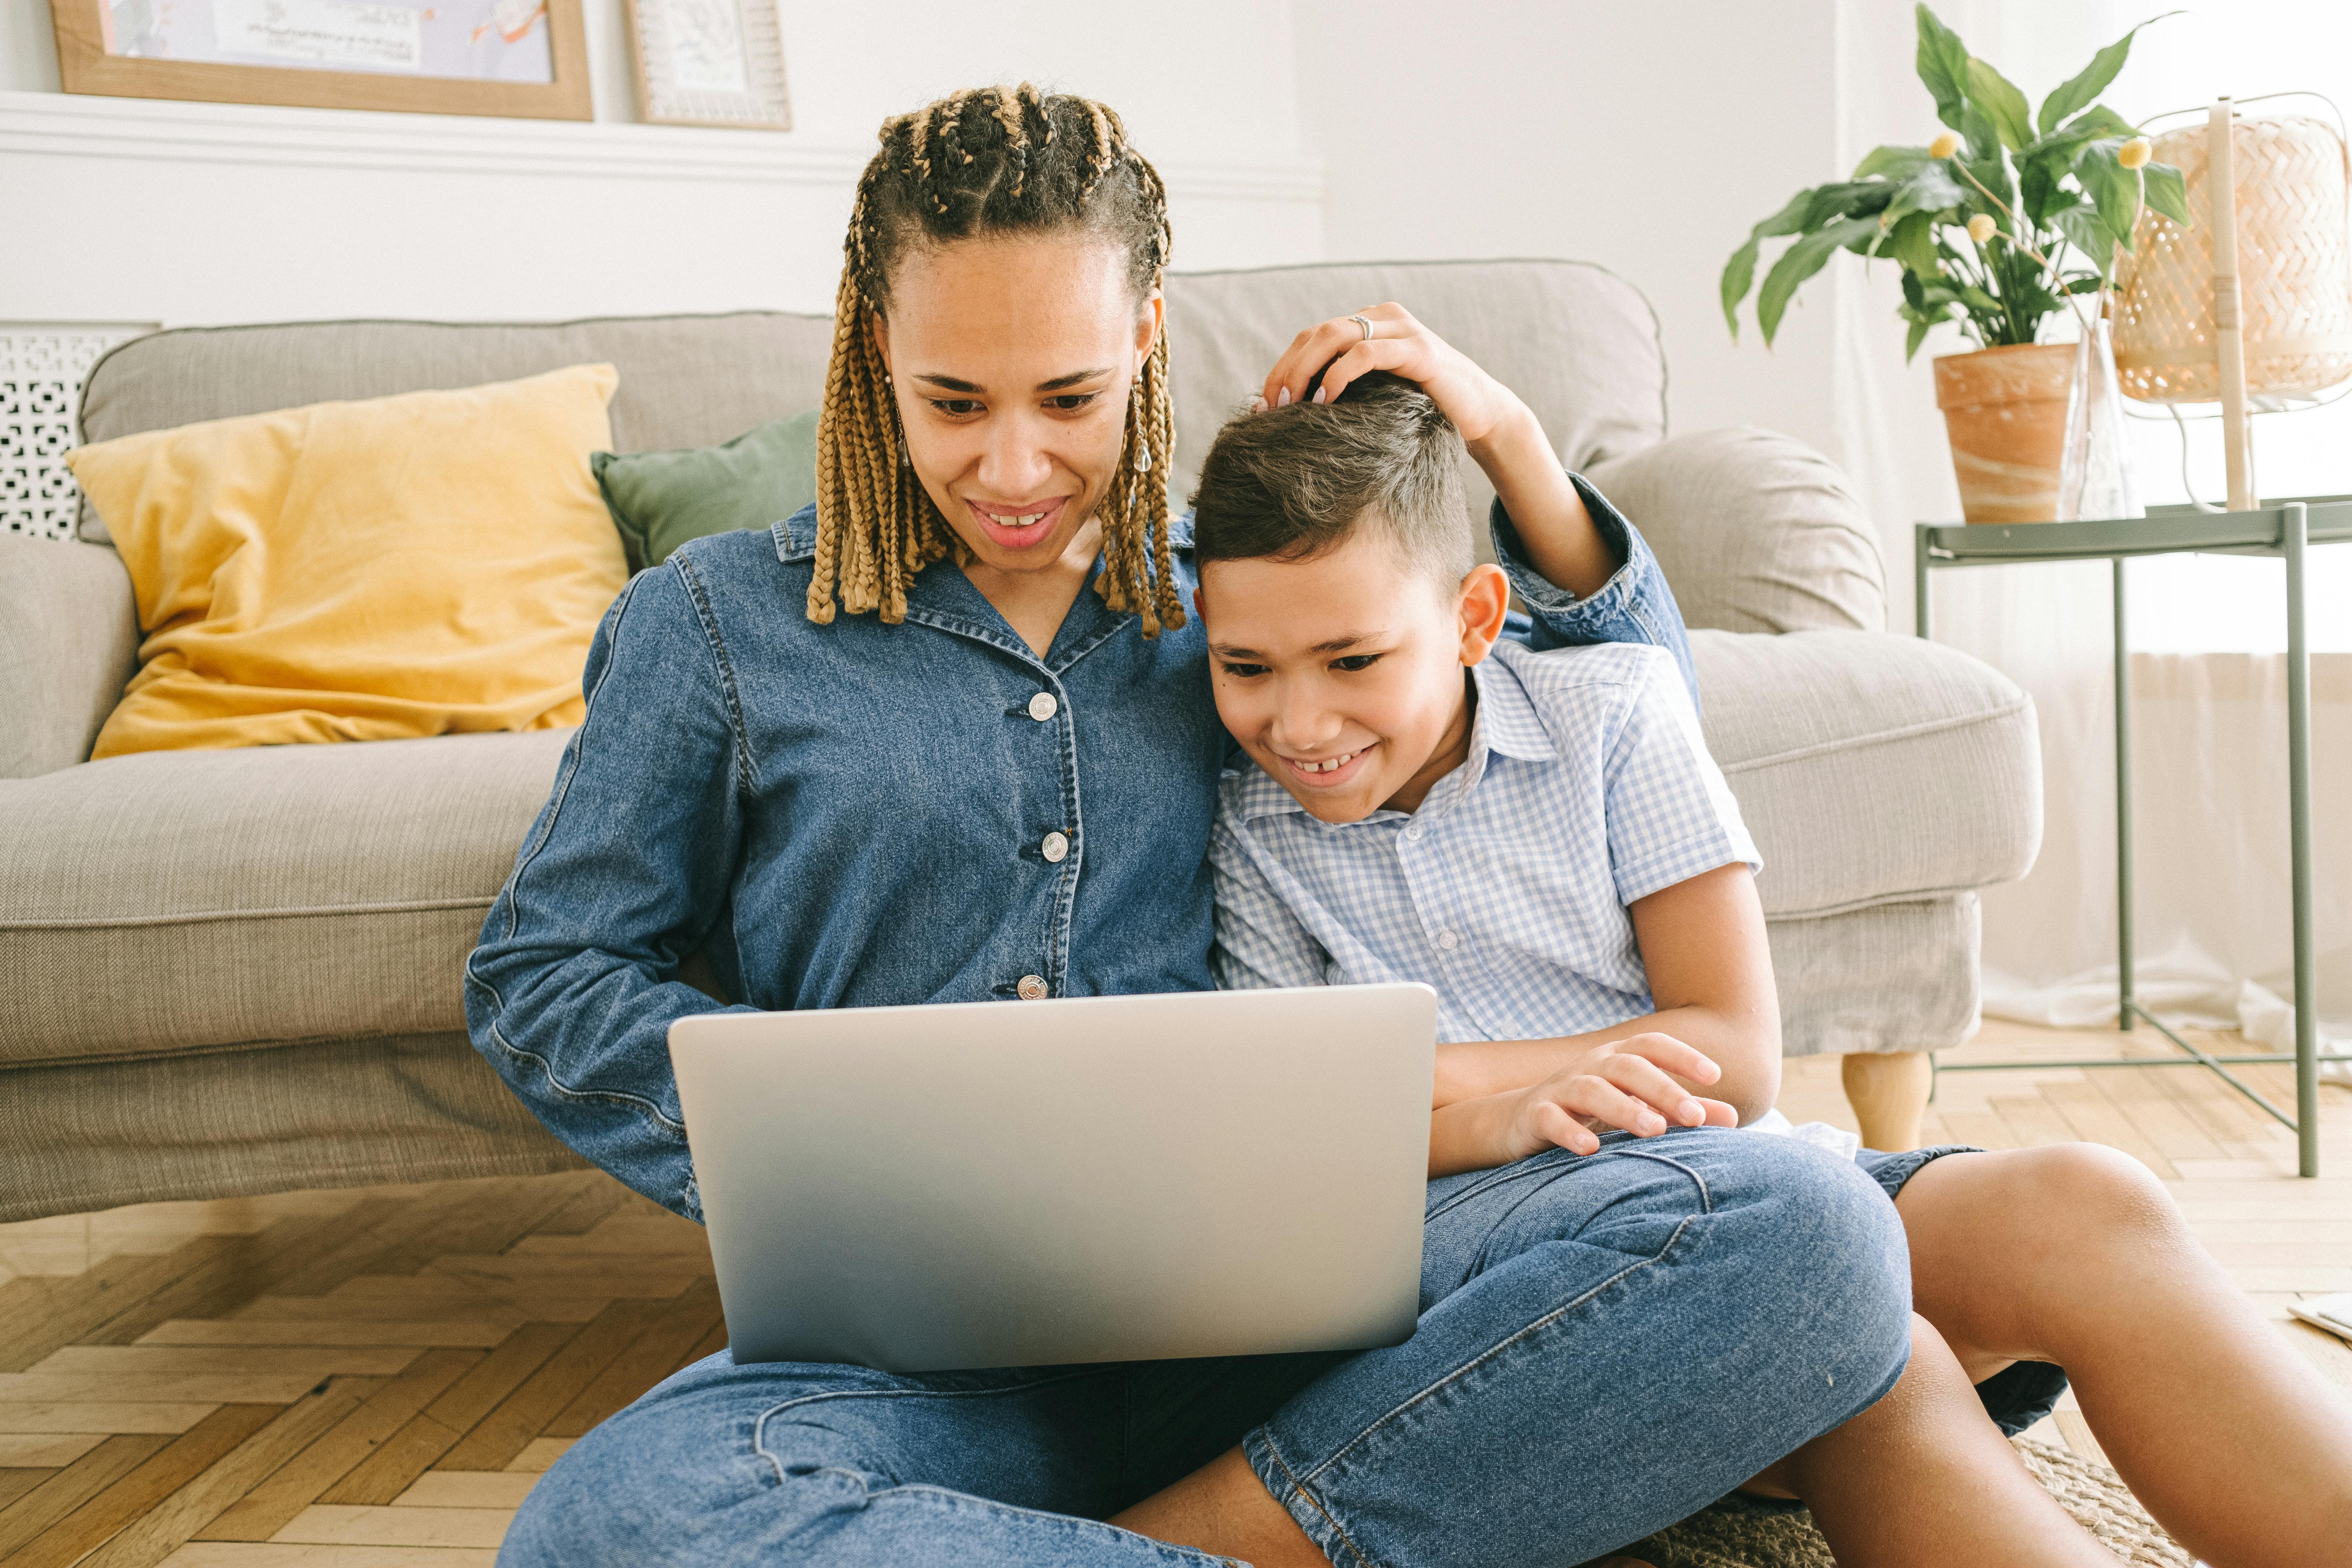 woman and young boy sitting on floor with laptop